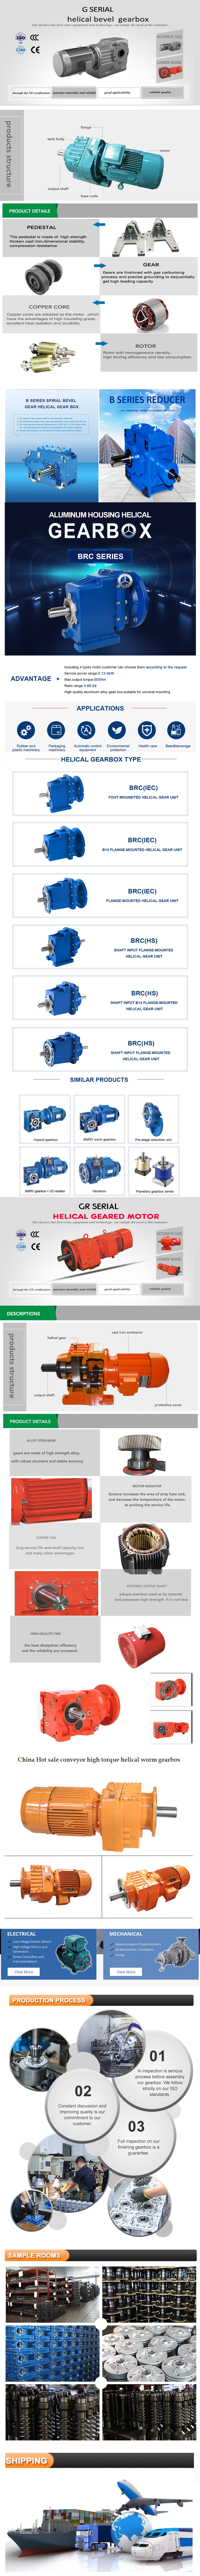   in Veracruz Mexico  sales   price   shop   near me   near me shop   factory   supplier Atg Pgh Series High Precision Helical Gears Planetary Gearbox for Servo Motor manufacturer   best   Cost   Custom   Cheap   wholesaler 